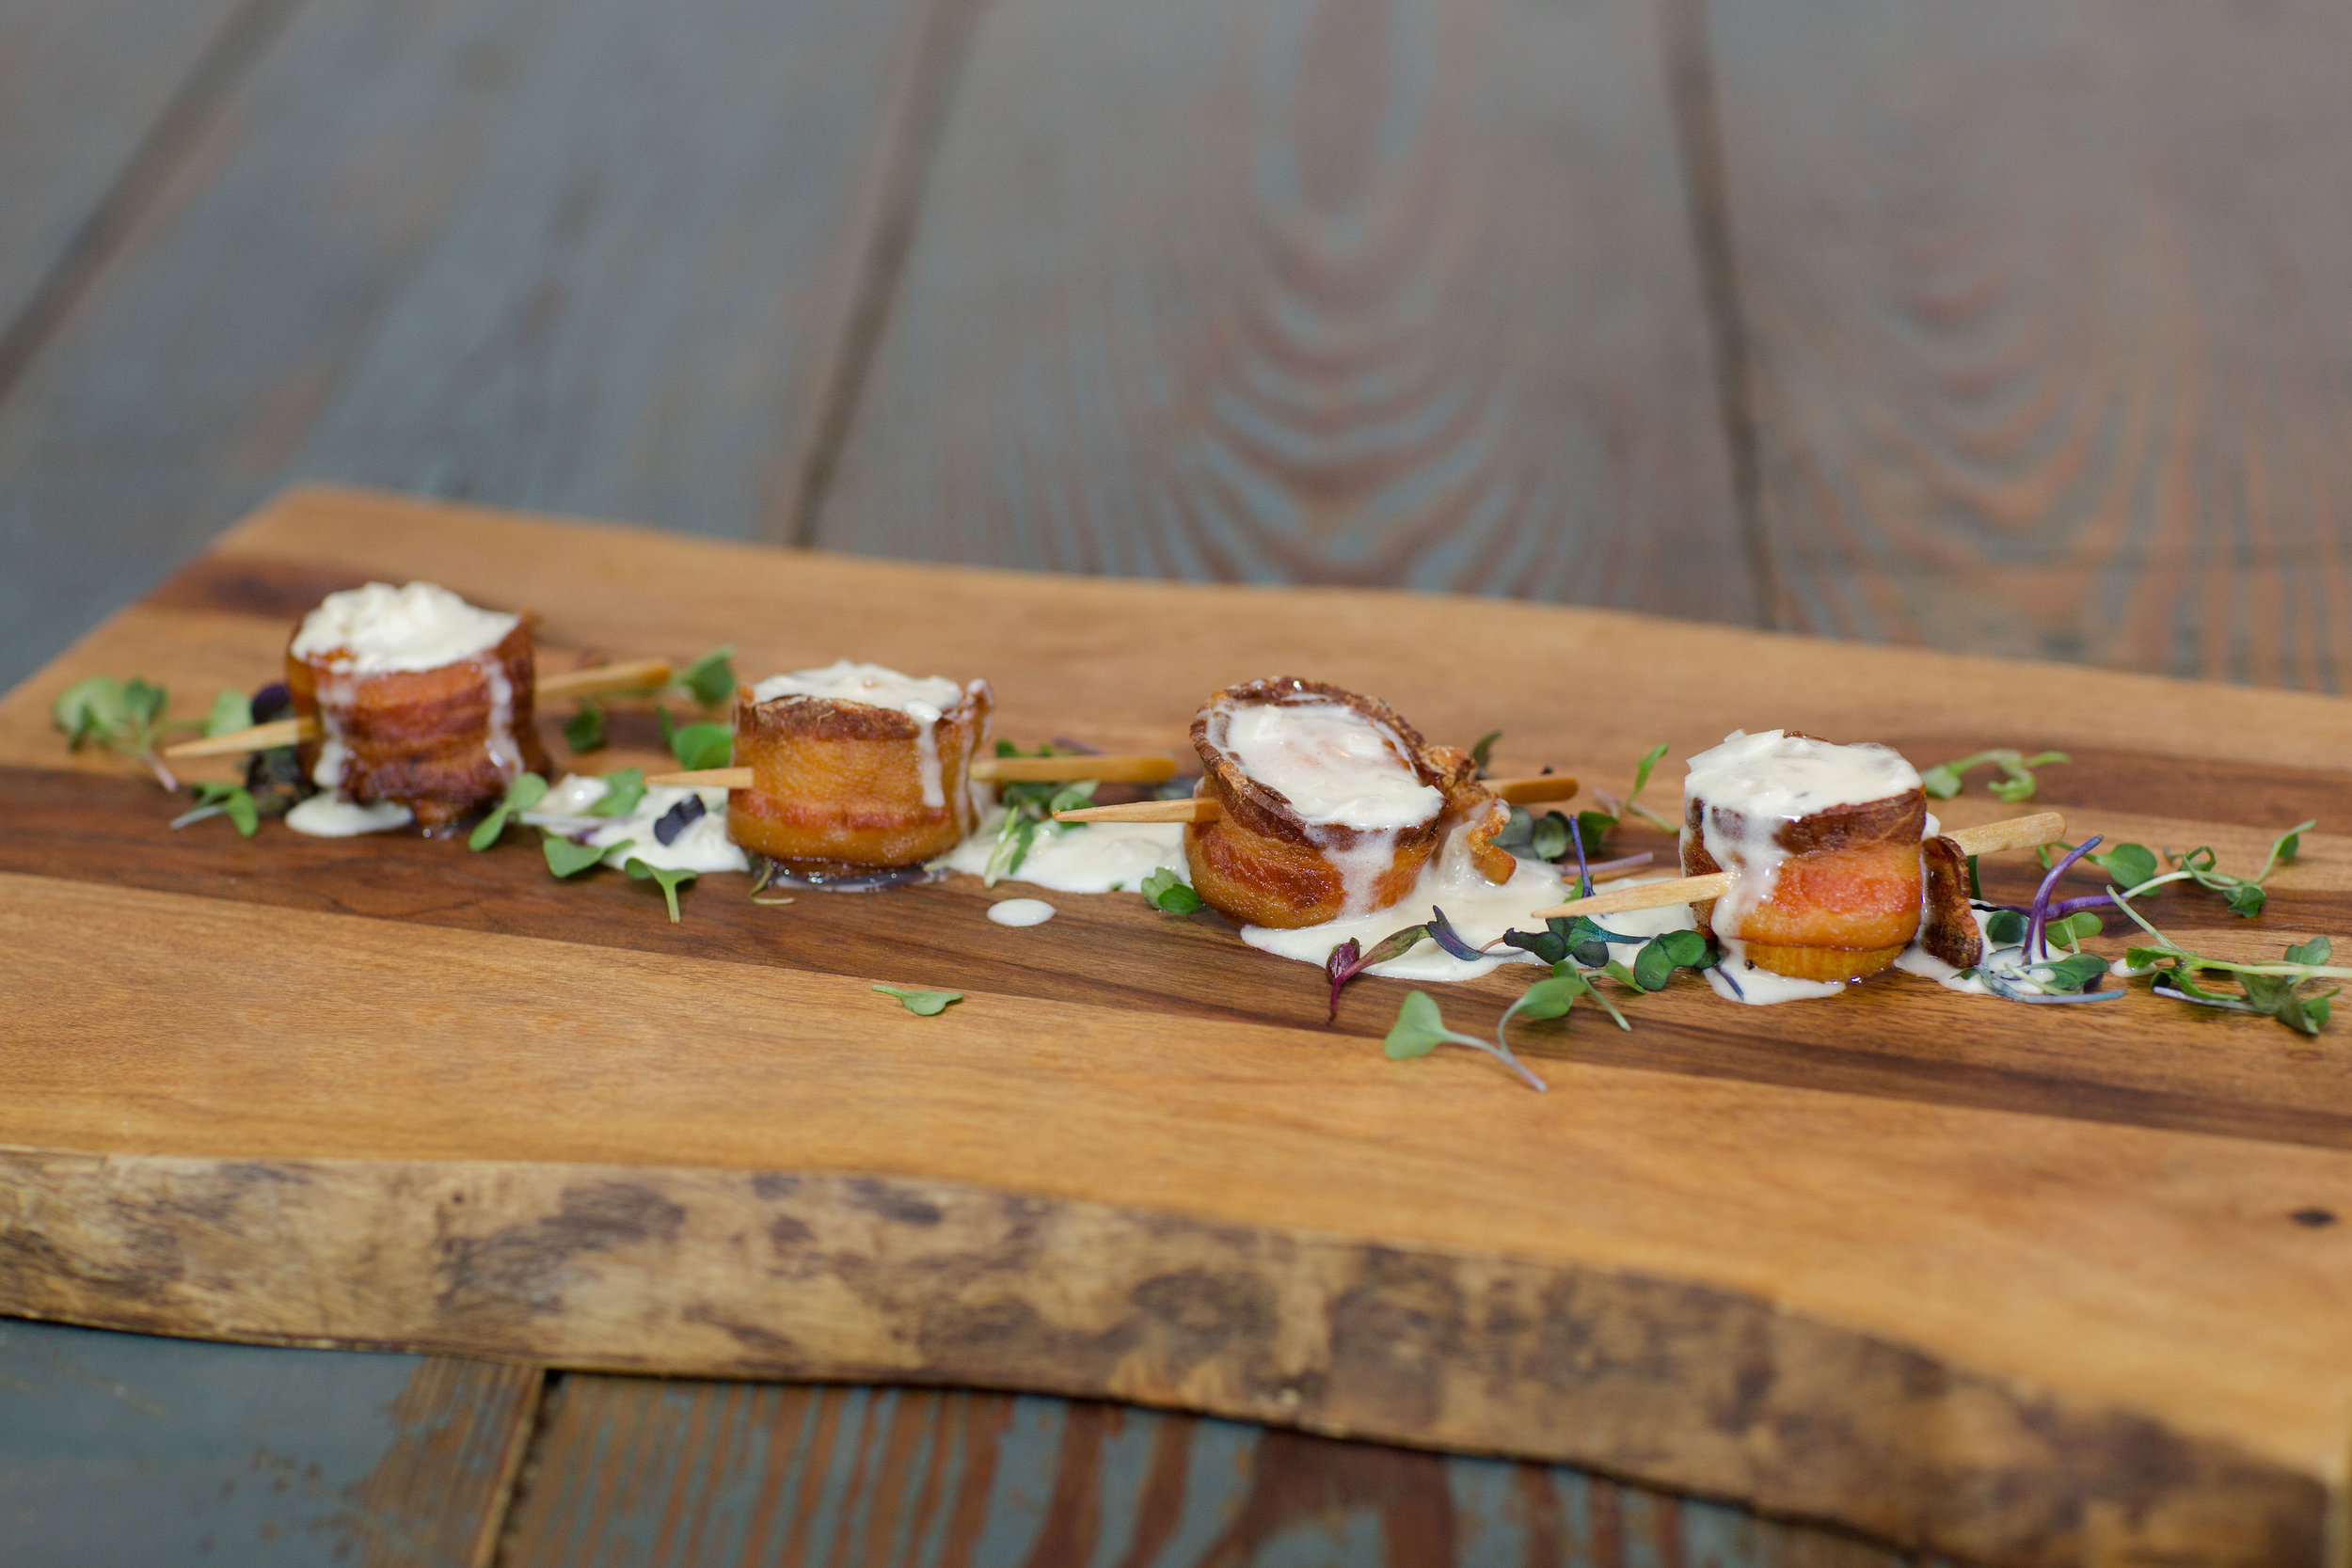 Smoked Bacon Wrapped Scallops - Hors d’ Oeuvres